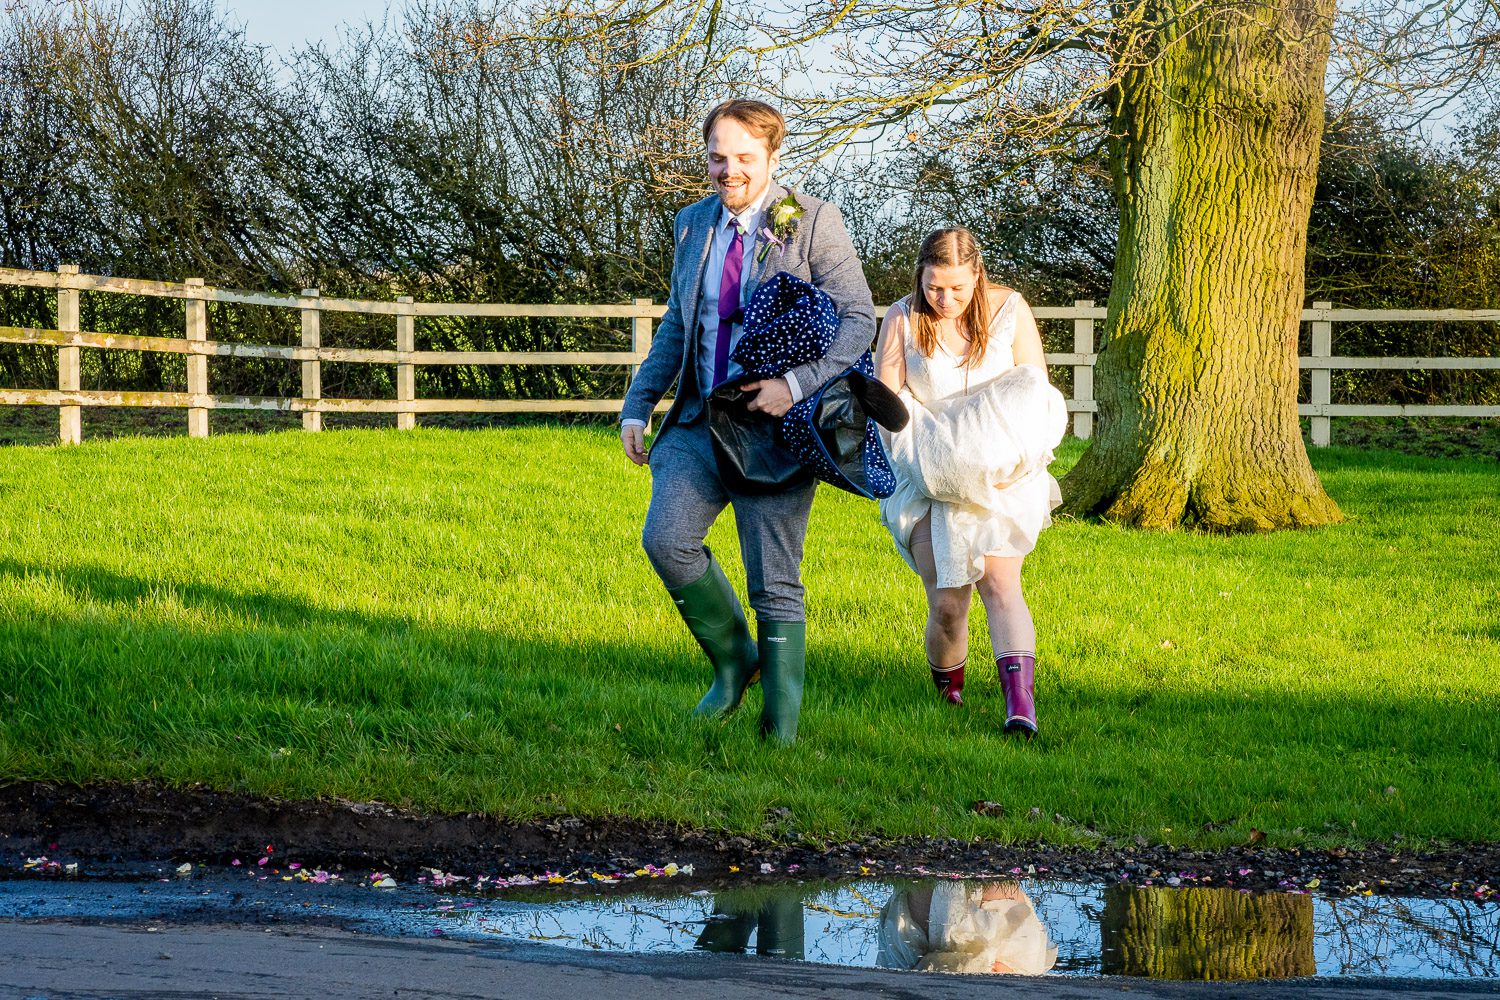 Relaxed wedding photography captured a bride and groom running in their wellies at Milling Barn, a Hertfordshire wedding venue